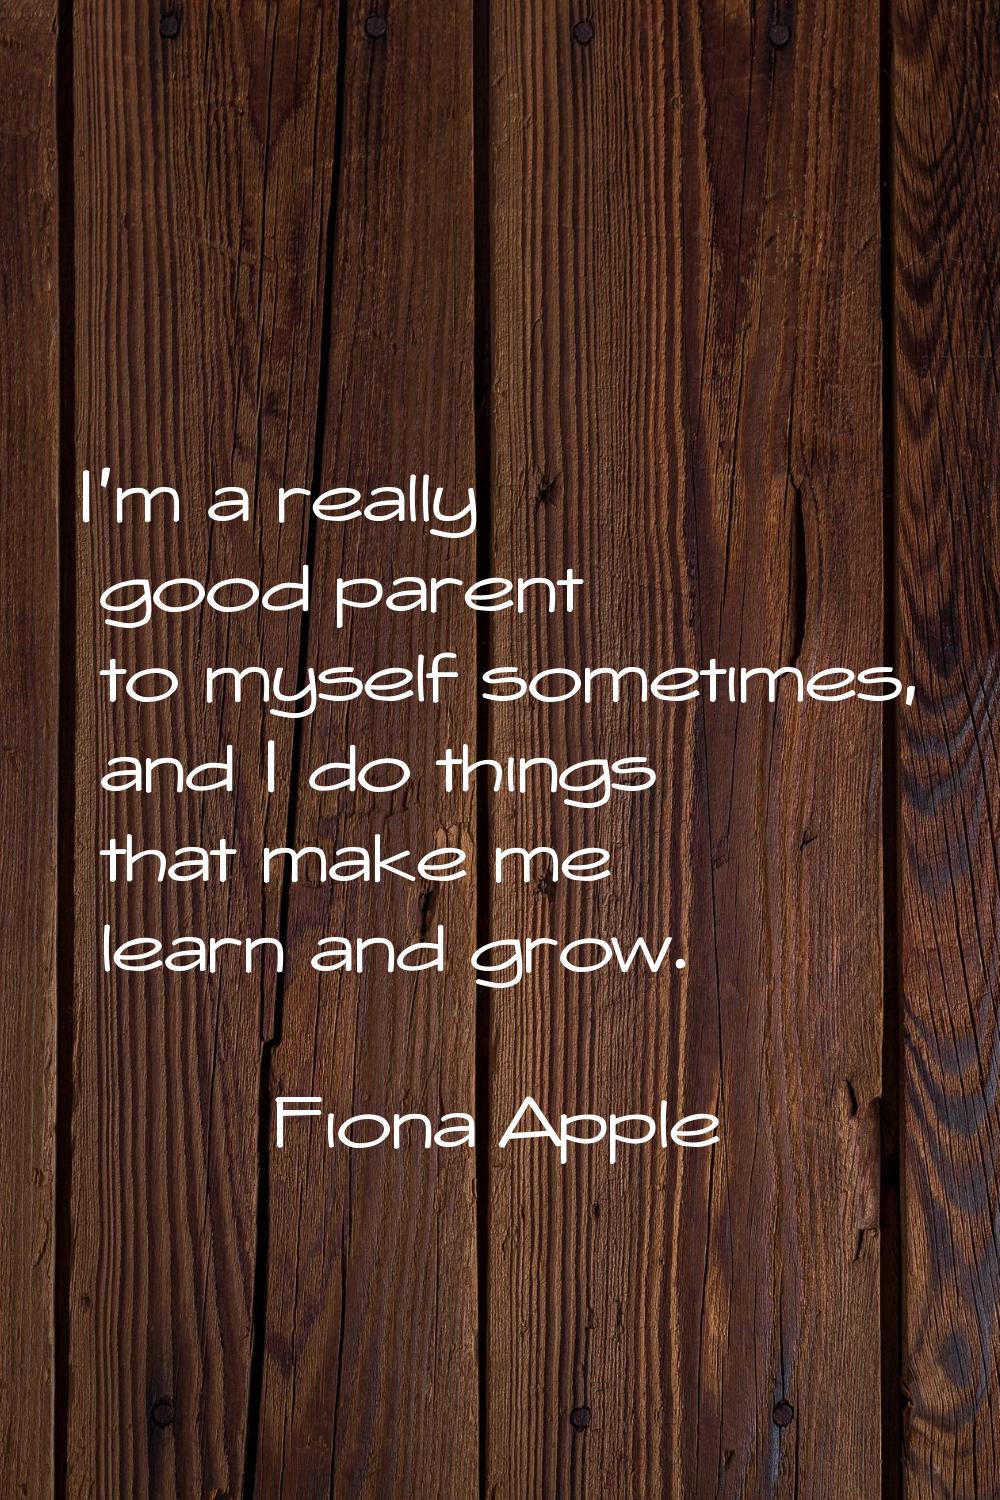 I'm a really good parent to myself sometimes, and I do things that make me learn and grow.